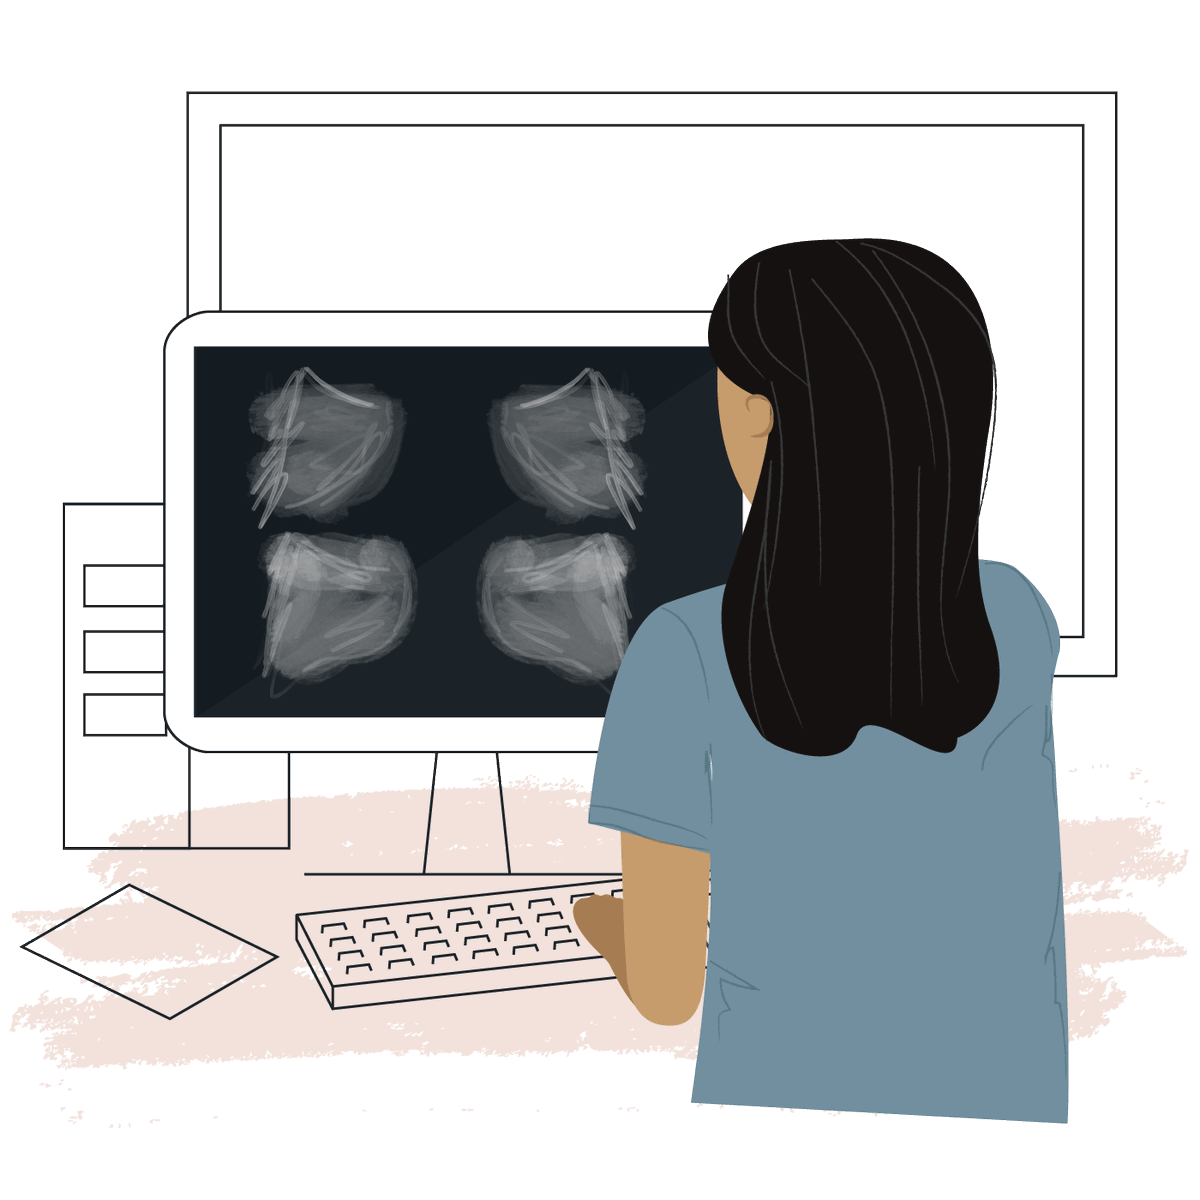 WRDensity is our #AI-driven software that assists radiologists in interpreting #breastdensity to create uniformity of density assessments at a practice level. The goal: to aid in early detection + give patients peace of mind. Learn more: whiterabbit.ai/products/wrden… #radiology